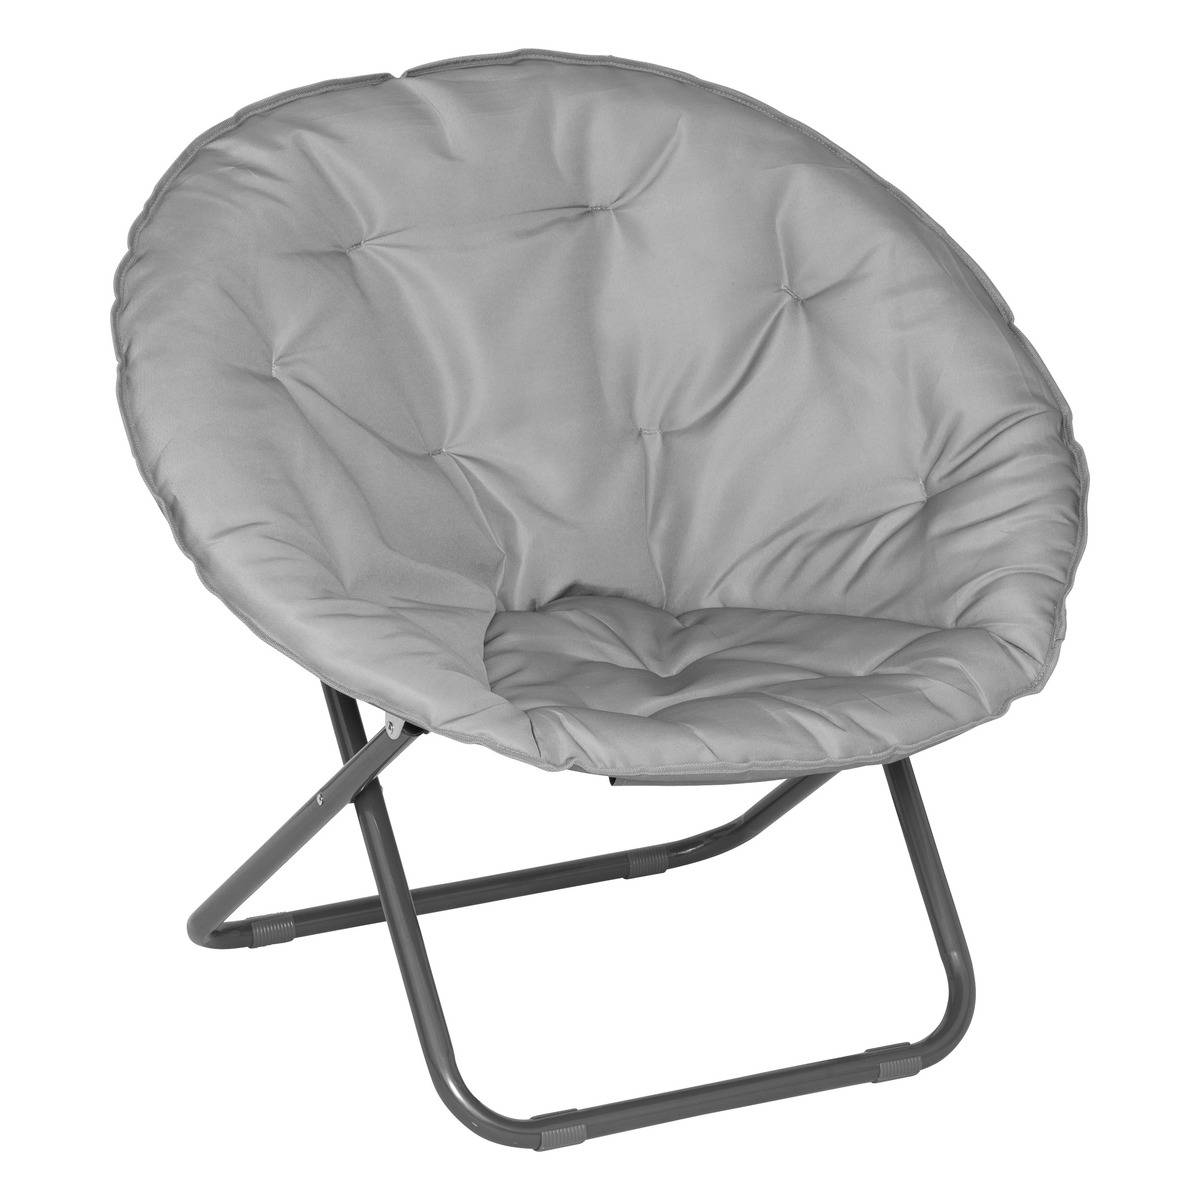 Fauteuil relax oeuf gris